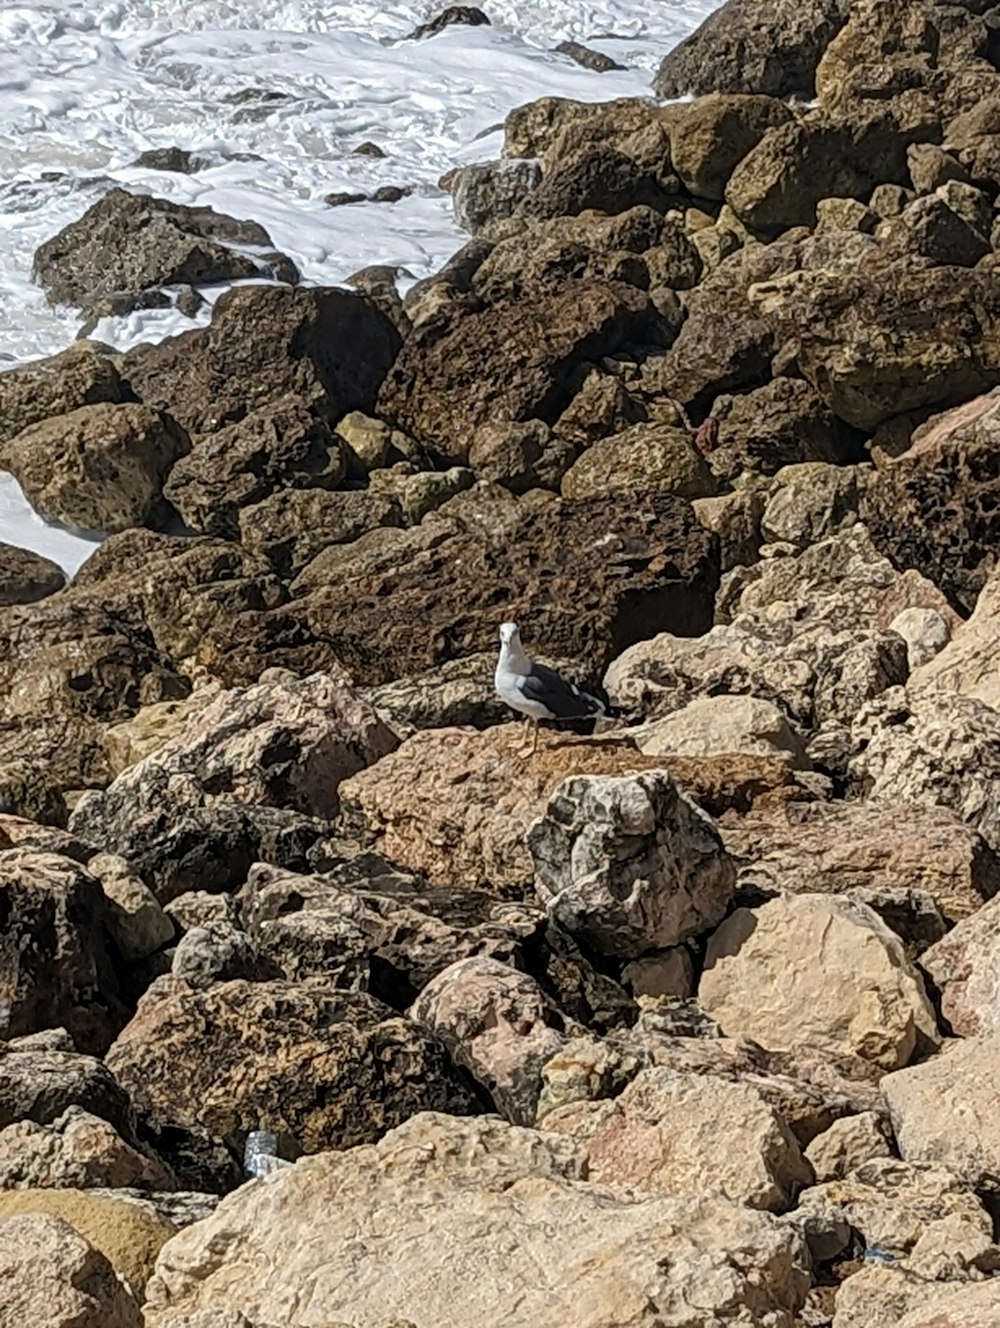 a seagull sitting on some rocks near the ocean